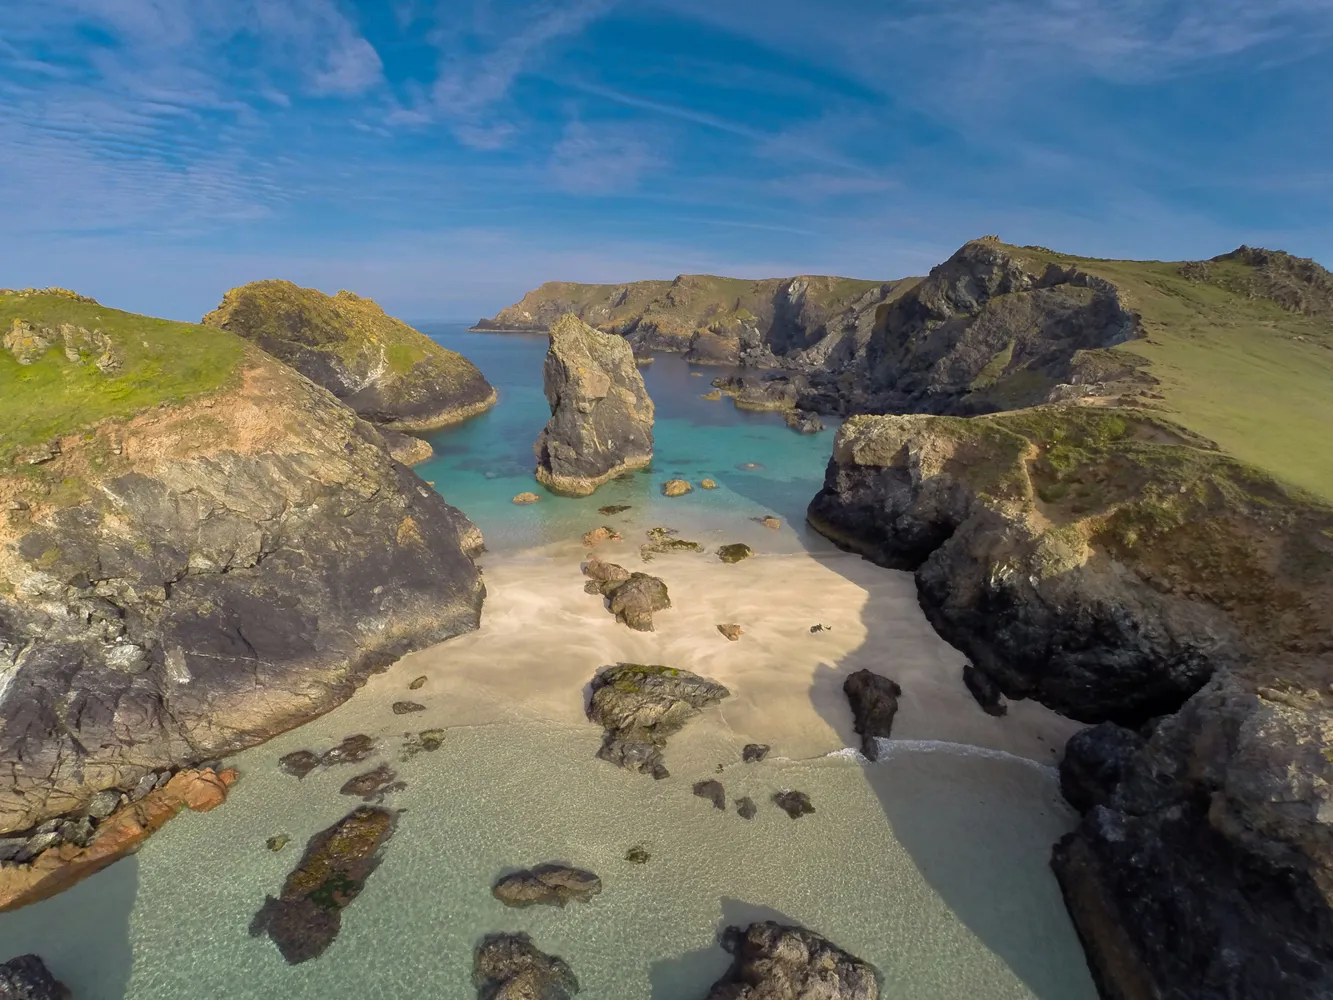 Kynance Cove from the air